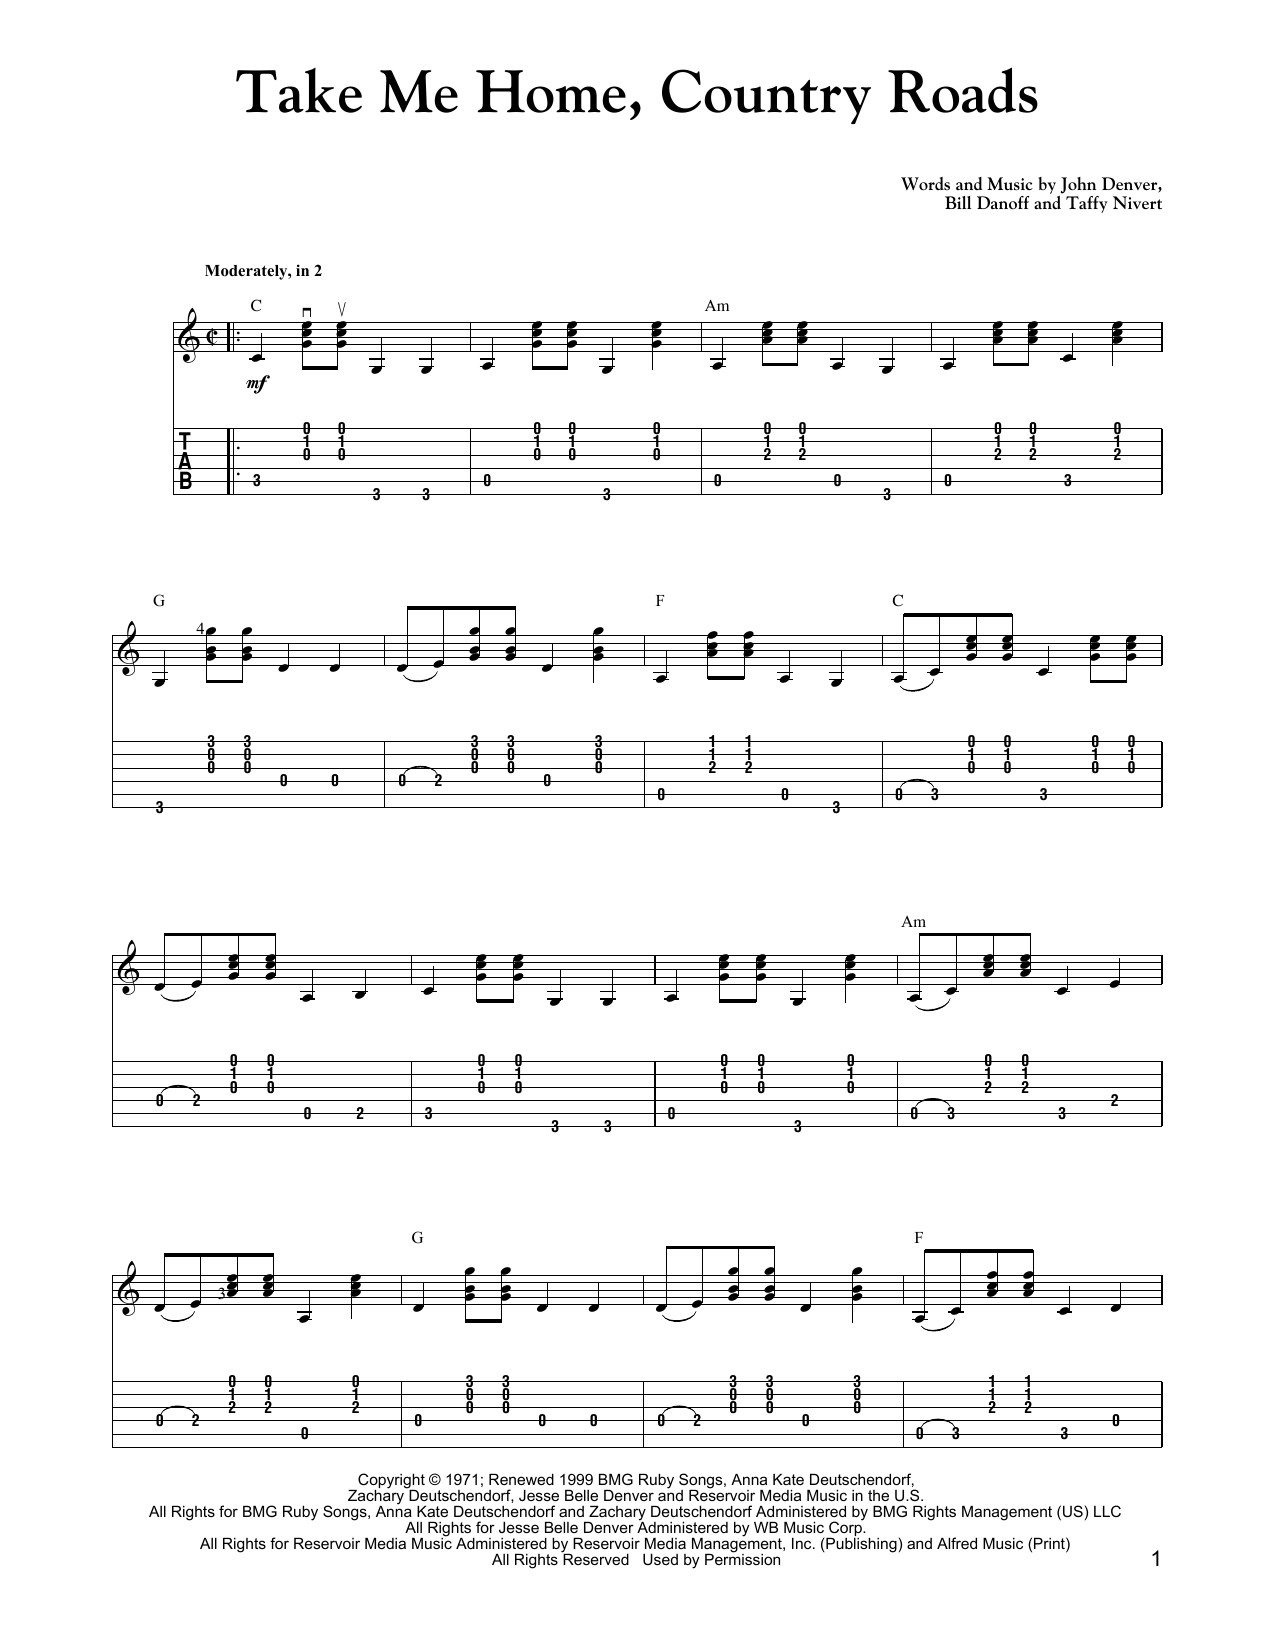 Carter Style Guitar Take Me Home Country Roads Sheet Music Download Printable Pdf Pop Music Score For Solo Guitar 157653